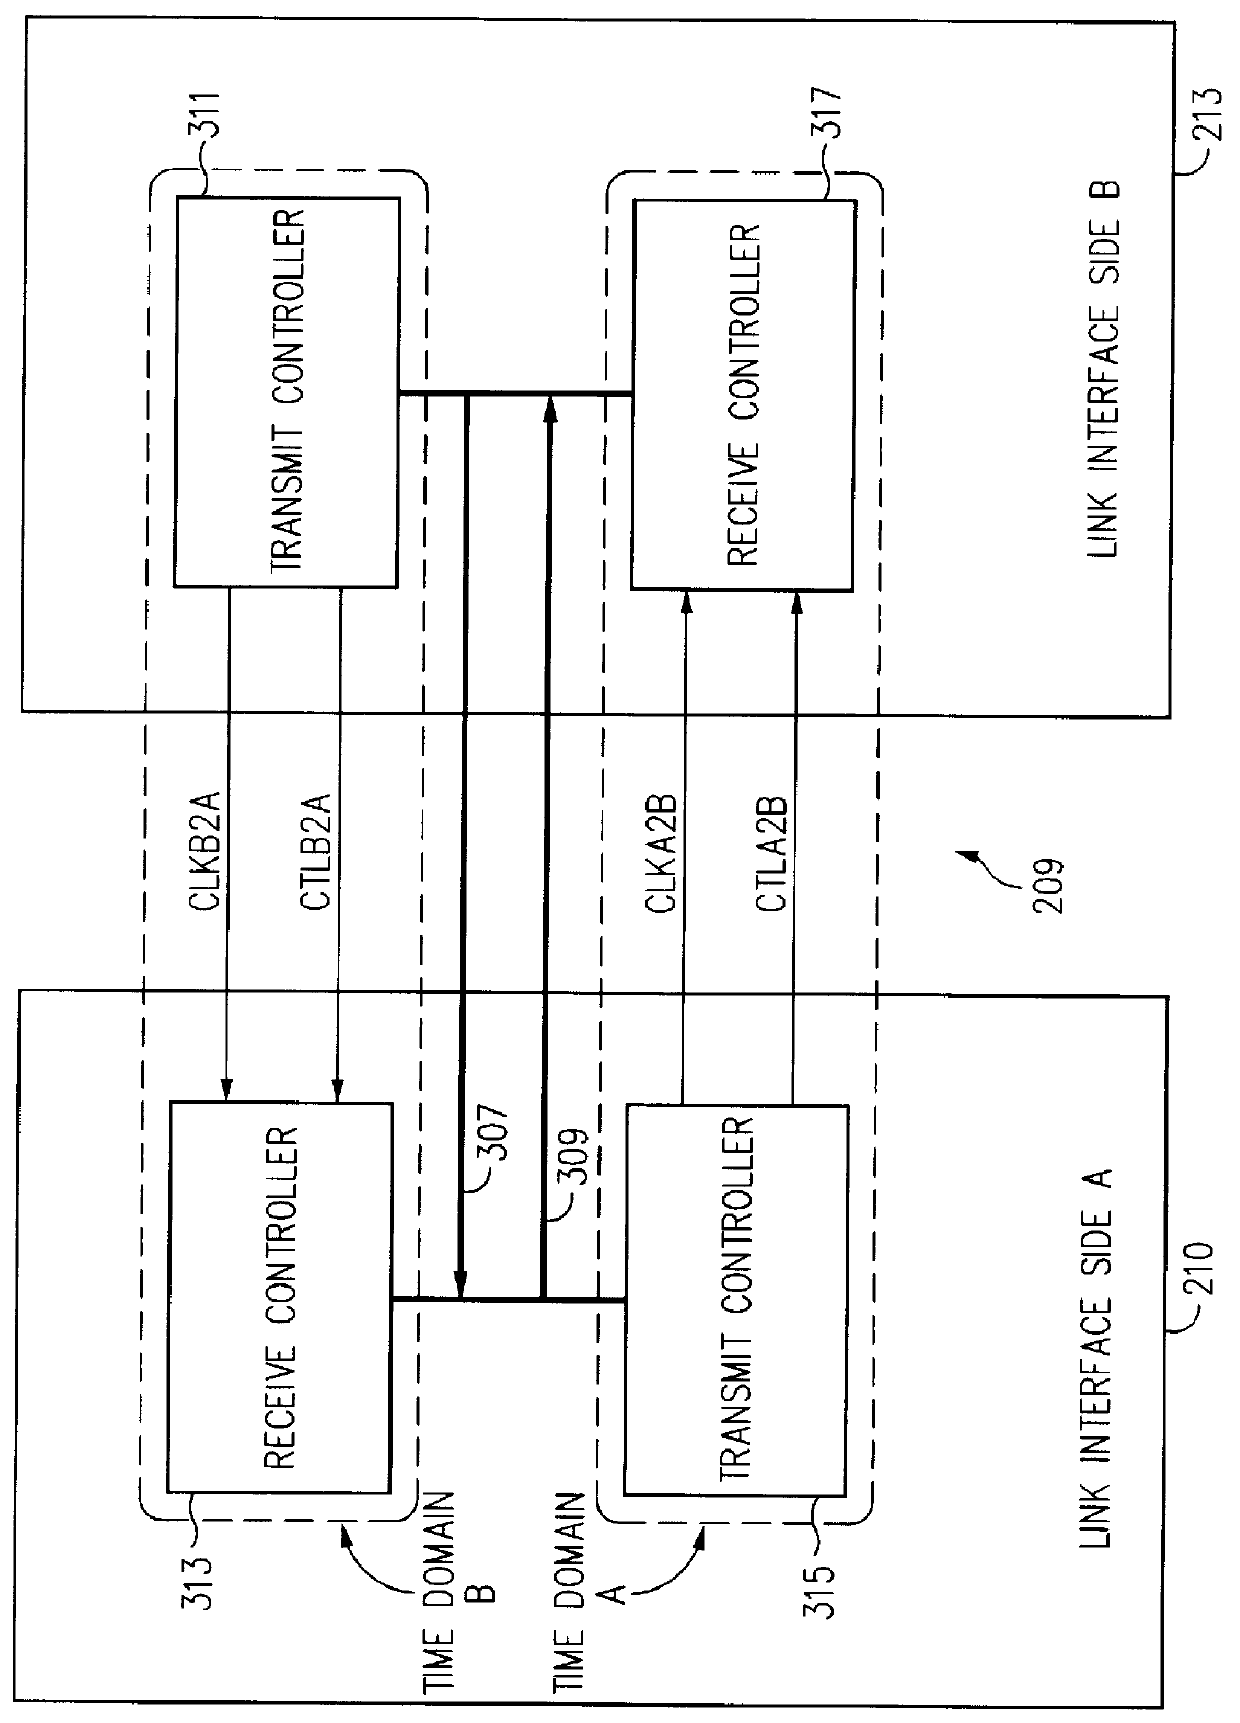 Integrated CPU and memory controller utilizing a communication link having isochronous and asynchronous priority modes